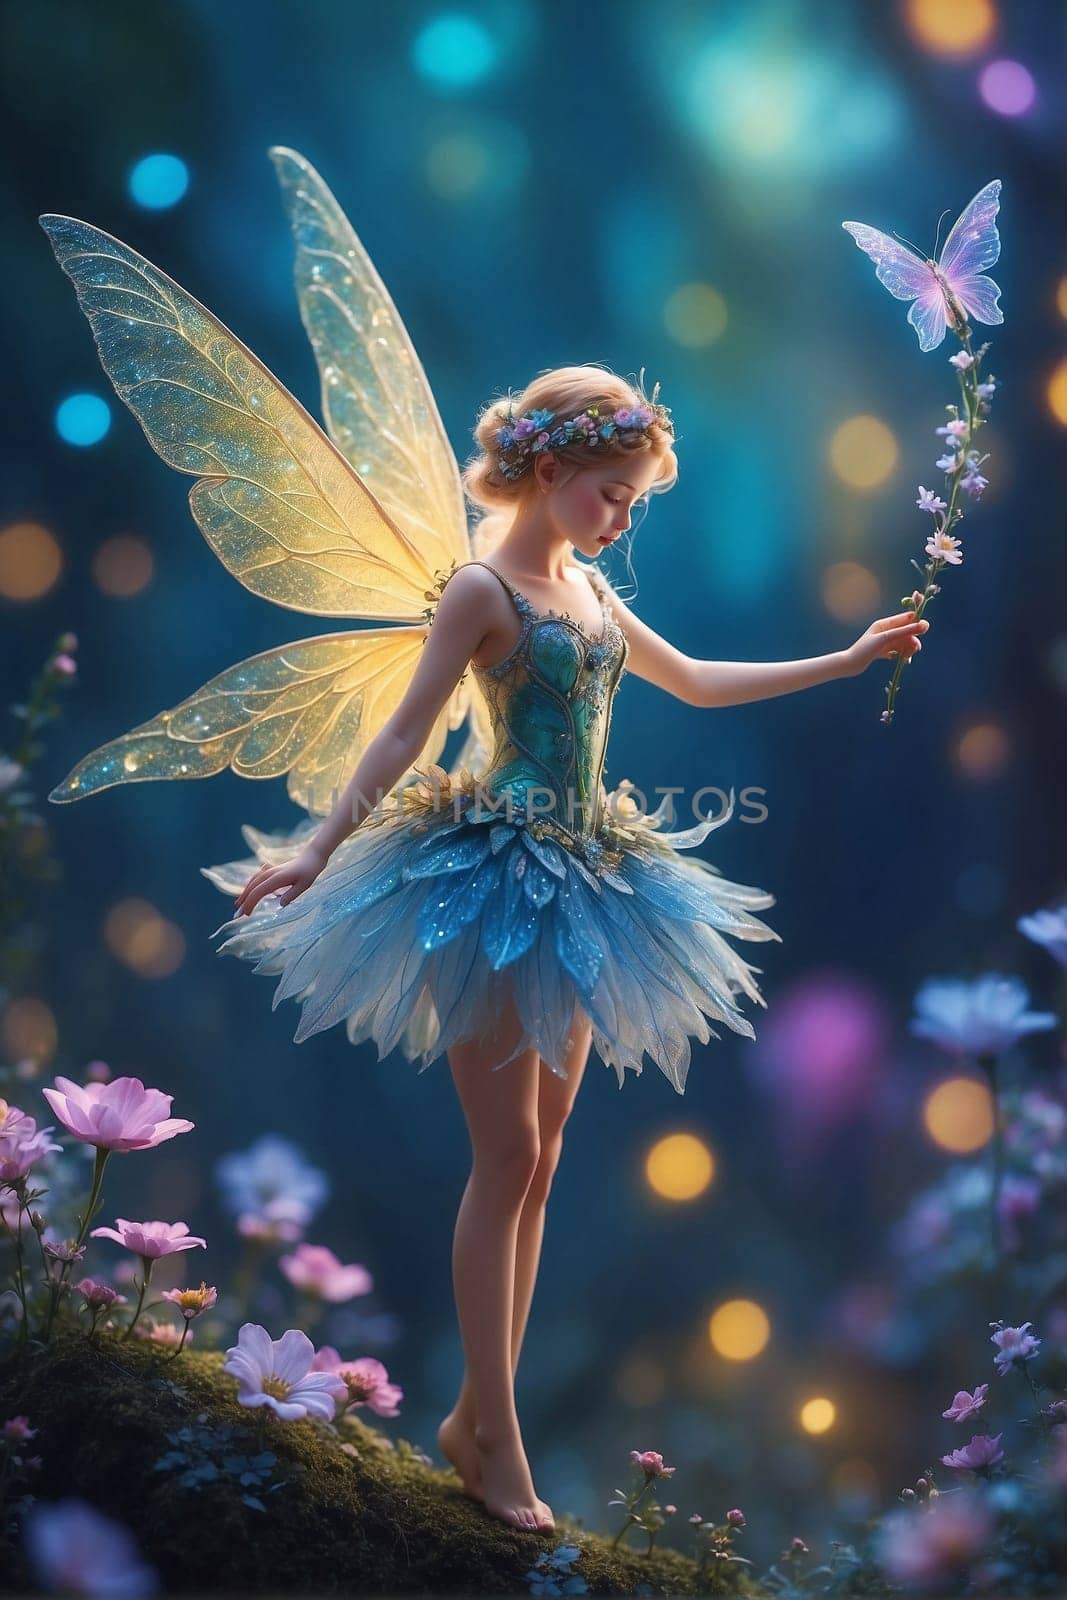 A little girl dressed as a fairy holds a flower in her hand.